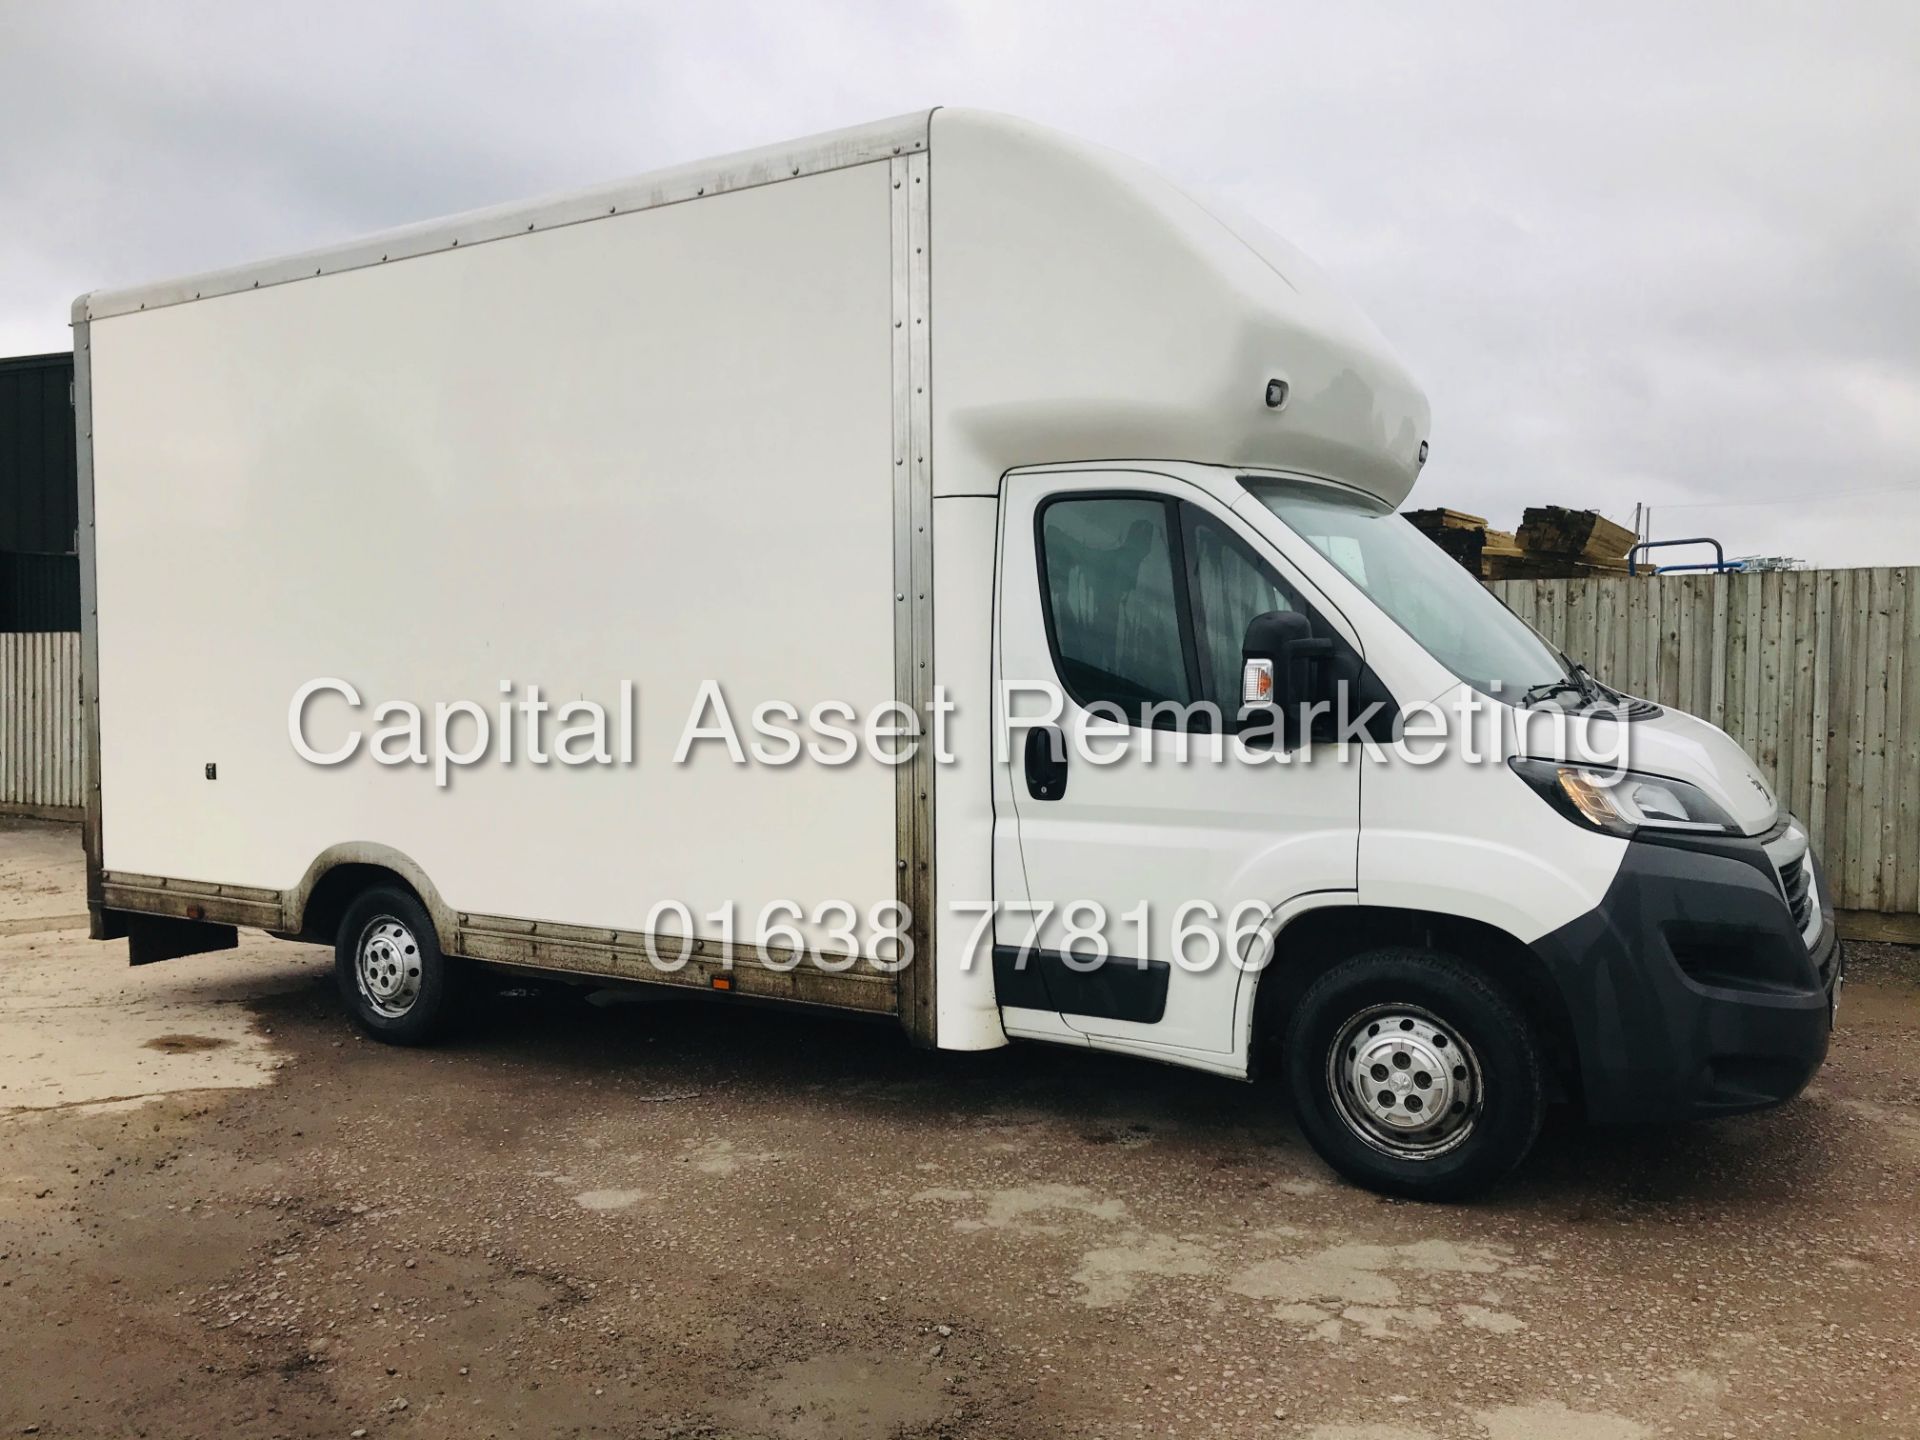 On Sale PEUGEOT BOXER 2.2HDI (130) LONG WHEEL BASE LUTON LOW LOADER" MAXI MOVER - 15 REG - AIR CON